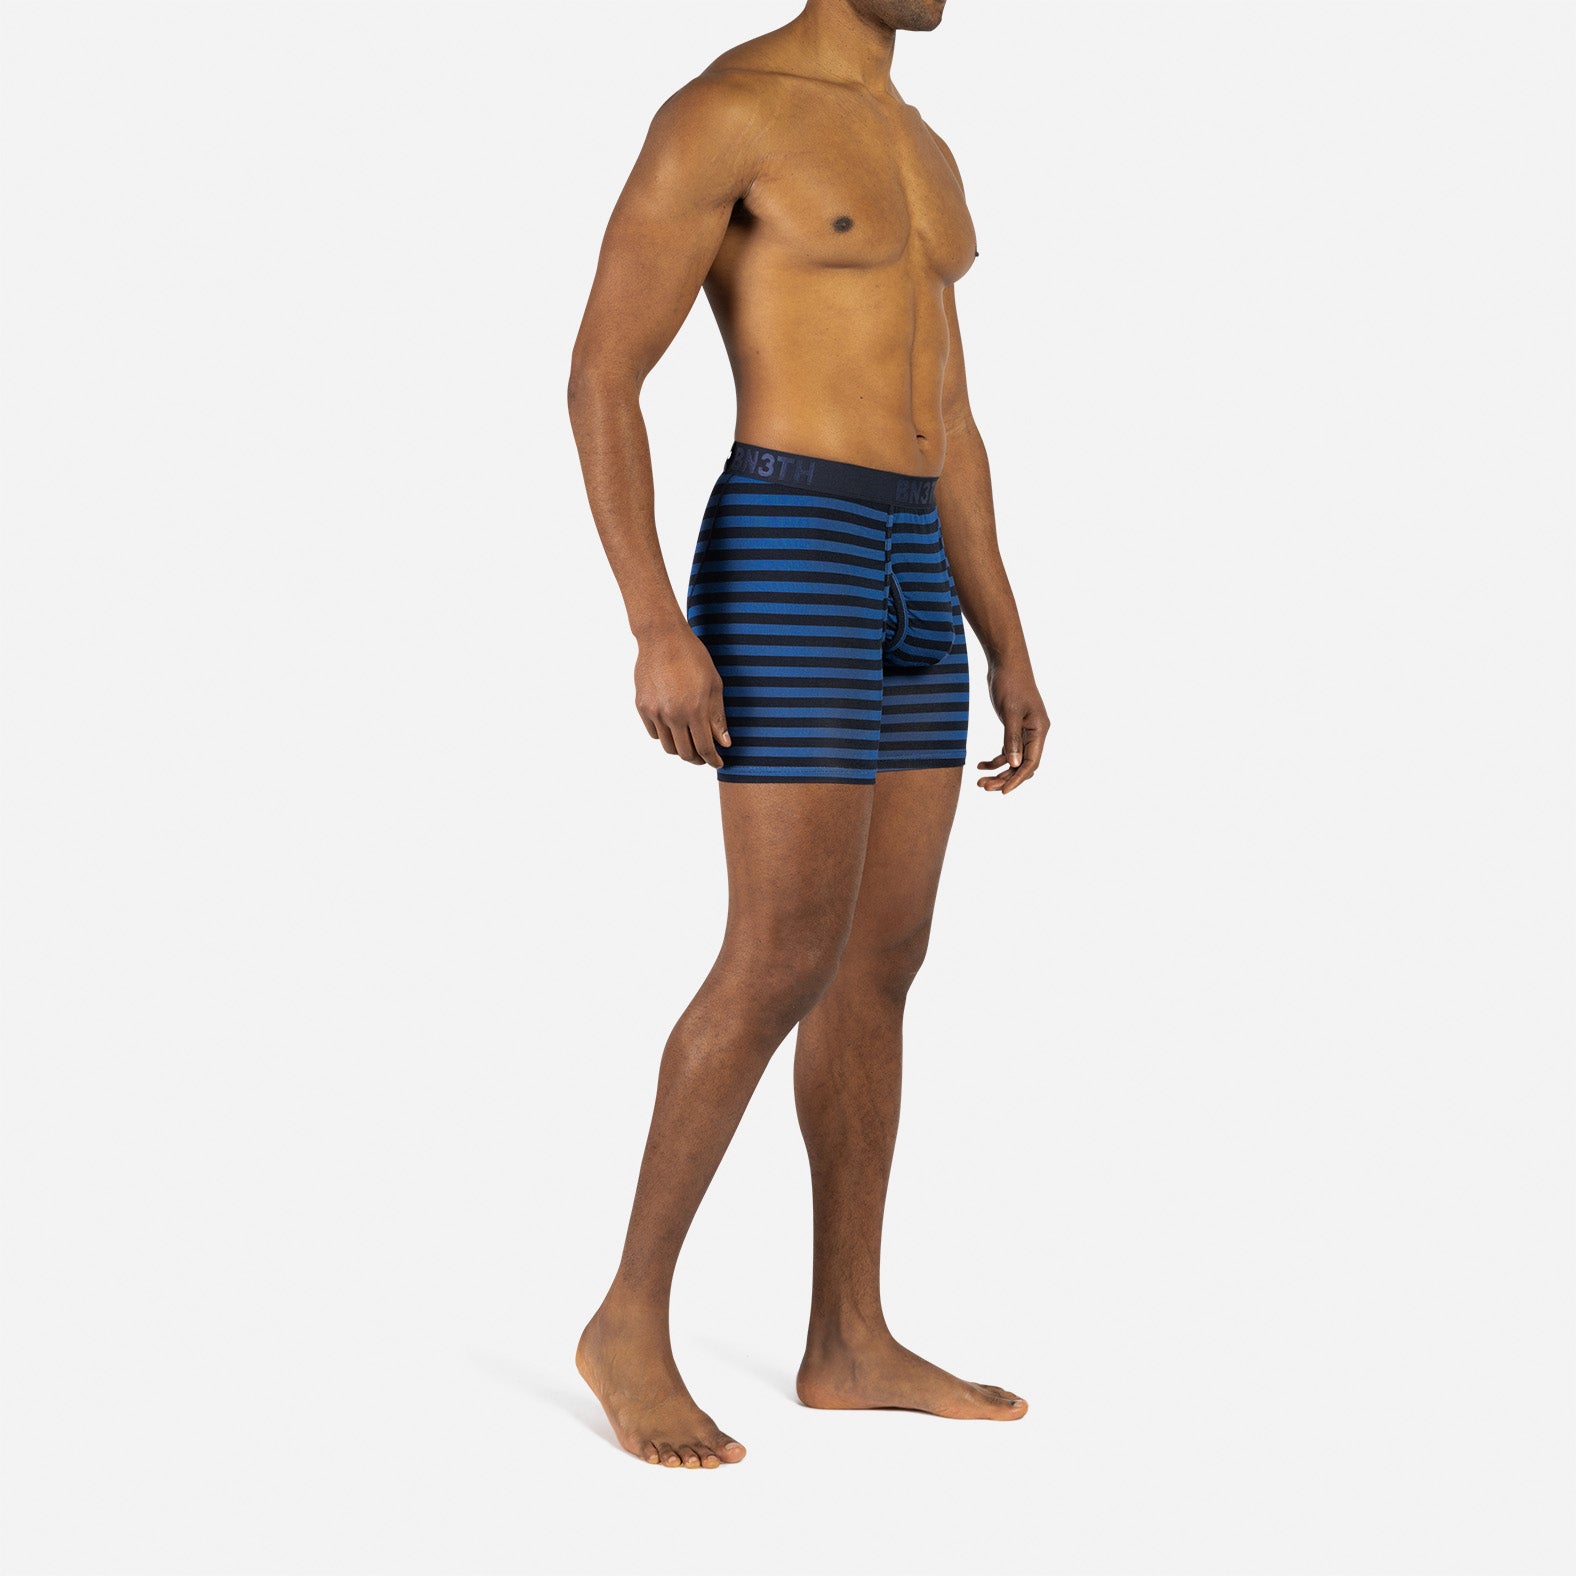 CLASSIC BOXER BRIEF WITH FLY: TRADITIONAL STRIPE QUARTZ